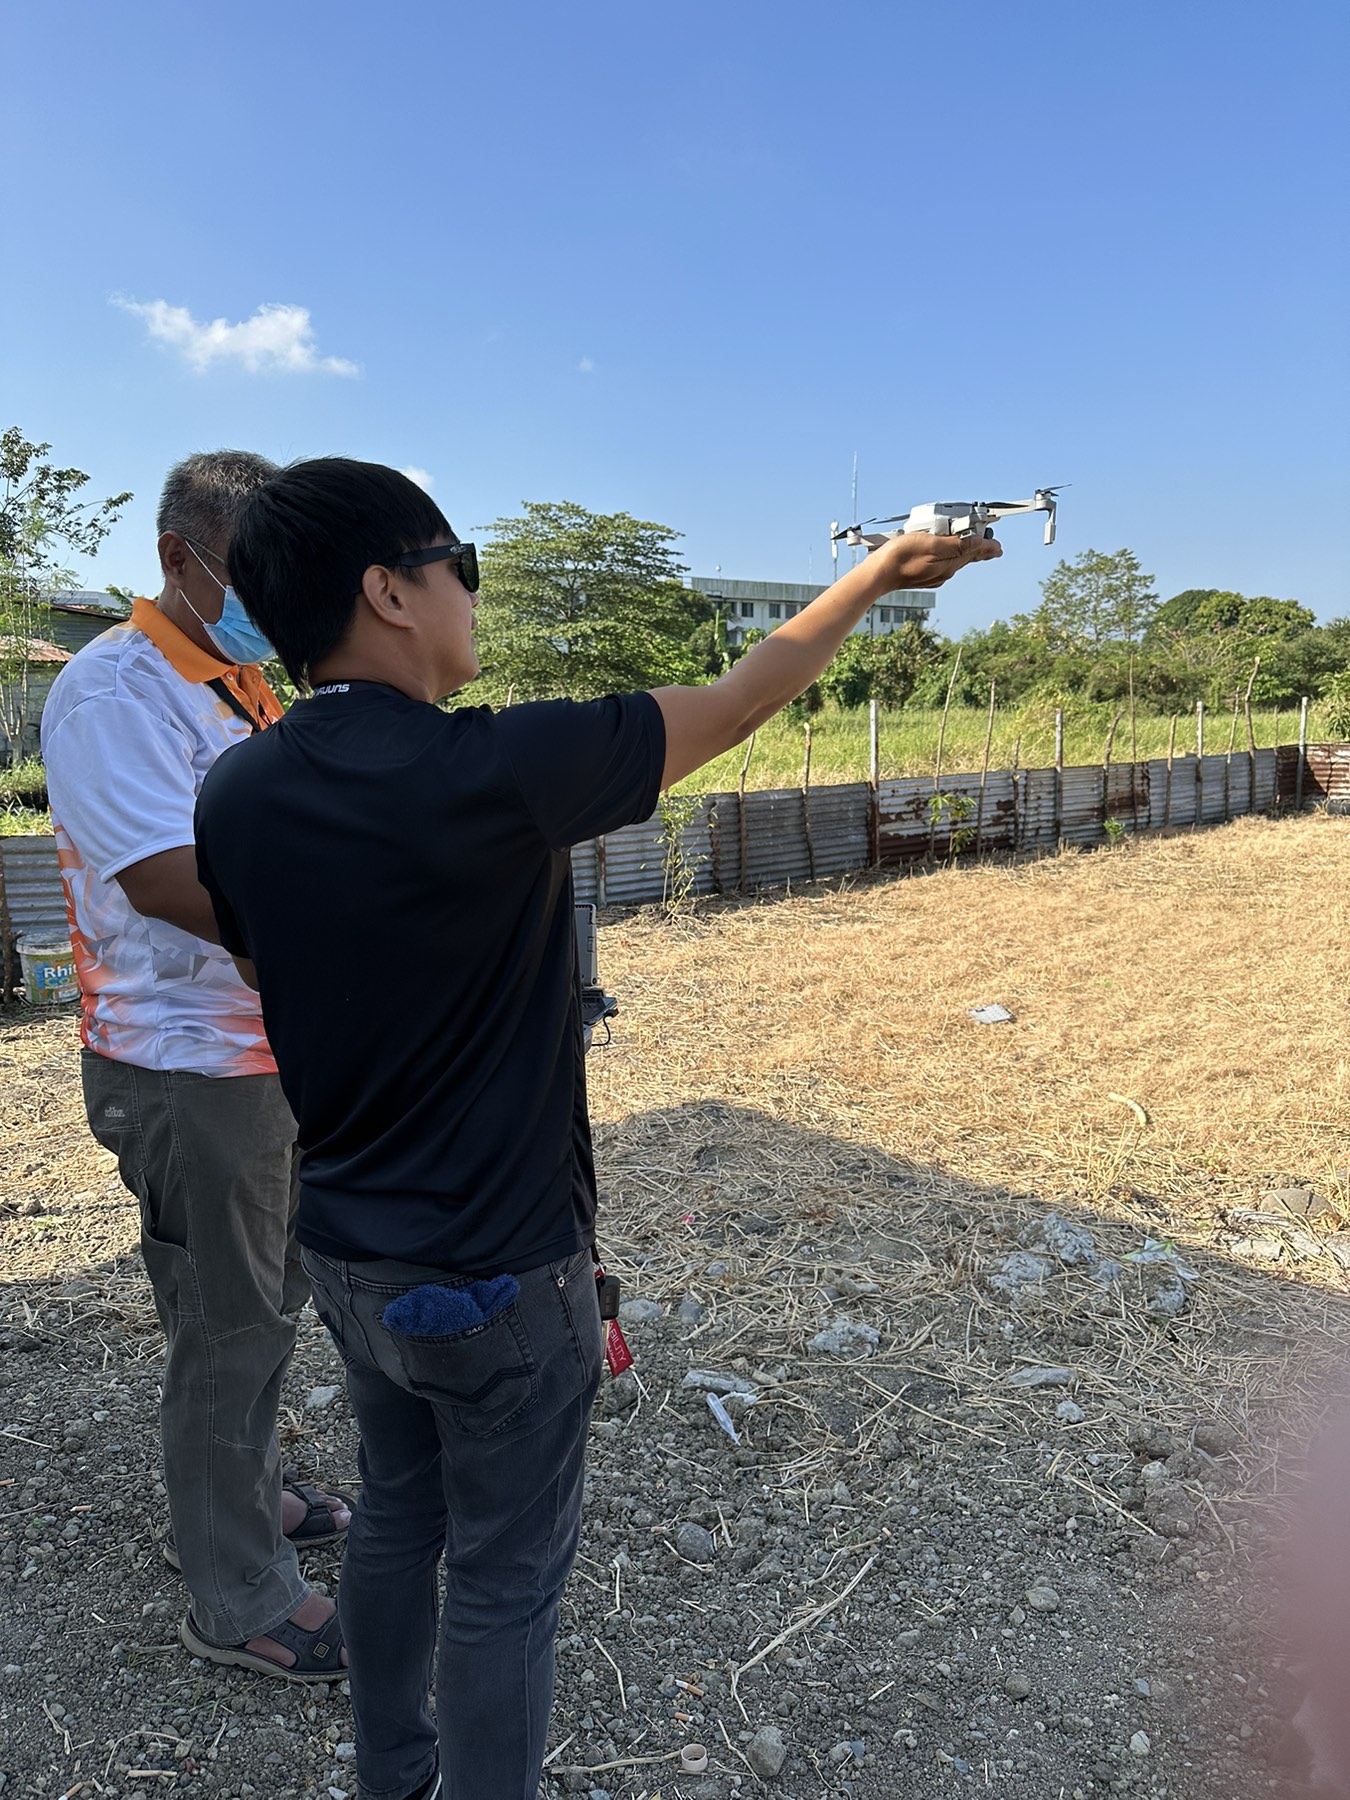 Day 2 - Flight Phase - Basic Remotely Piloted Aircraft (RPA)/Drone Flight Training